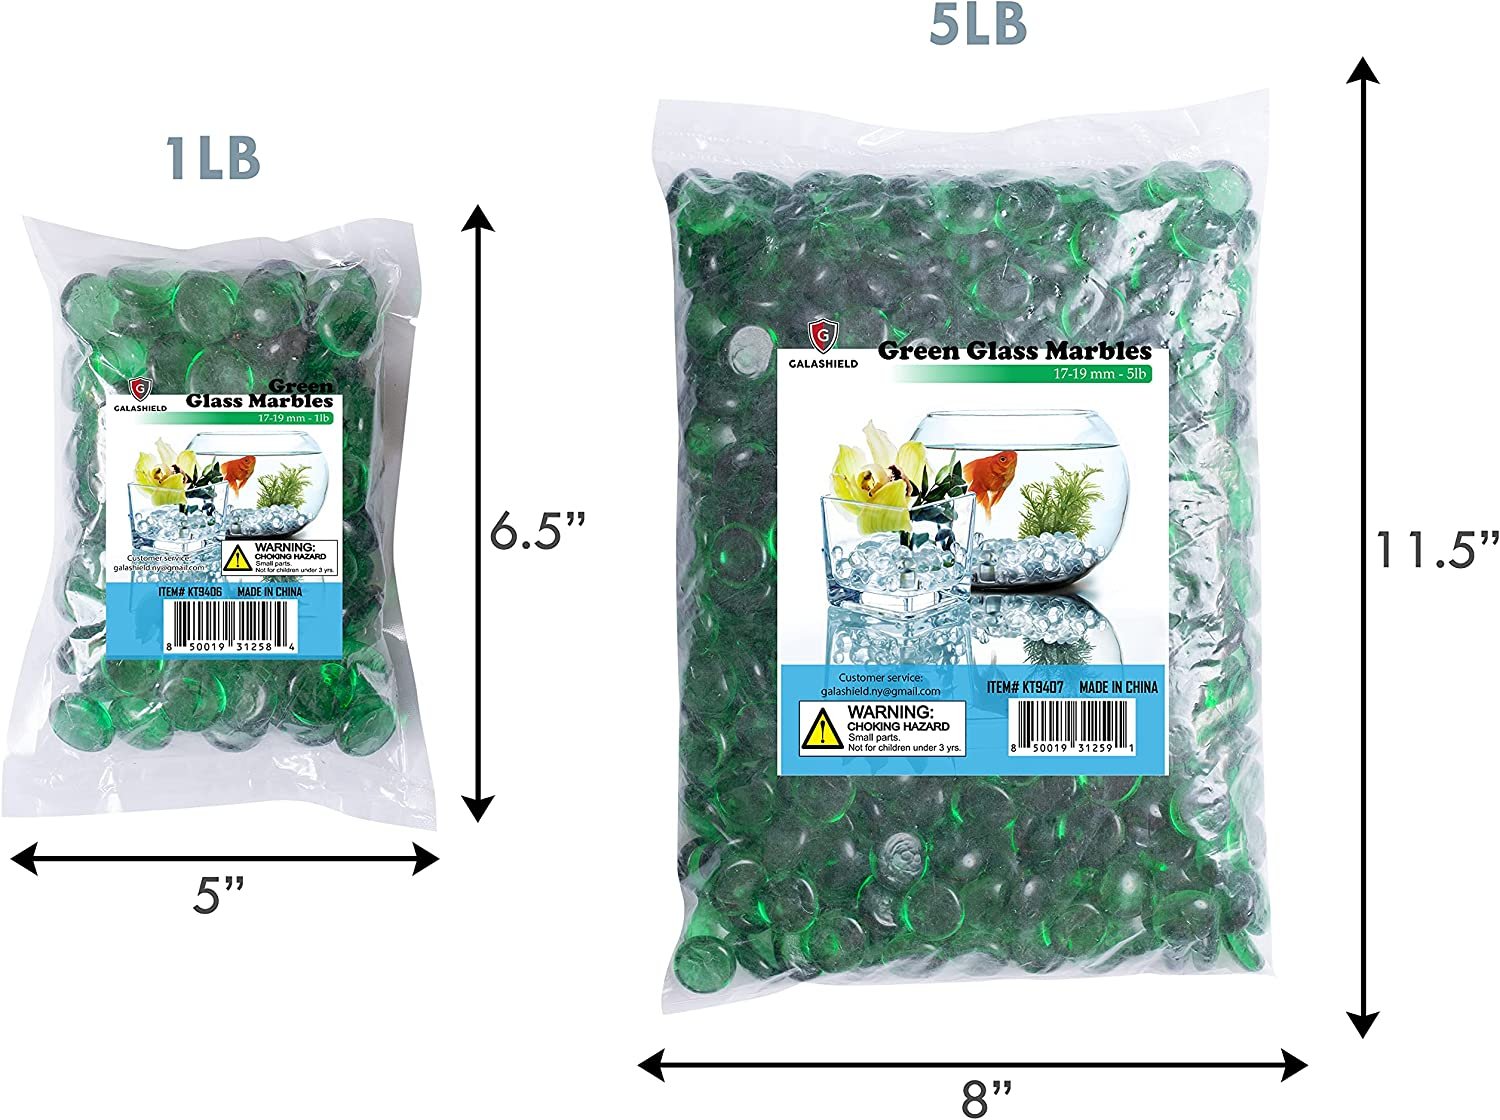 Galashield Green Flat Glass Marbles for Vases Glass Gems Beads Pebbles Vase Filler 5 LBS, Approx. 450 PCS - image 5 of 6